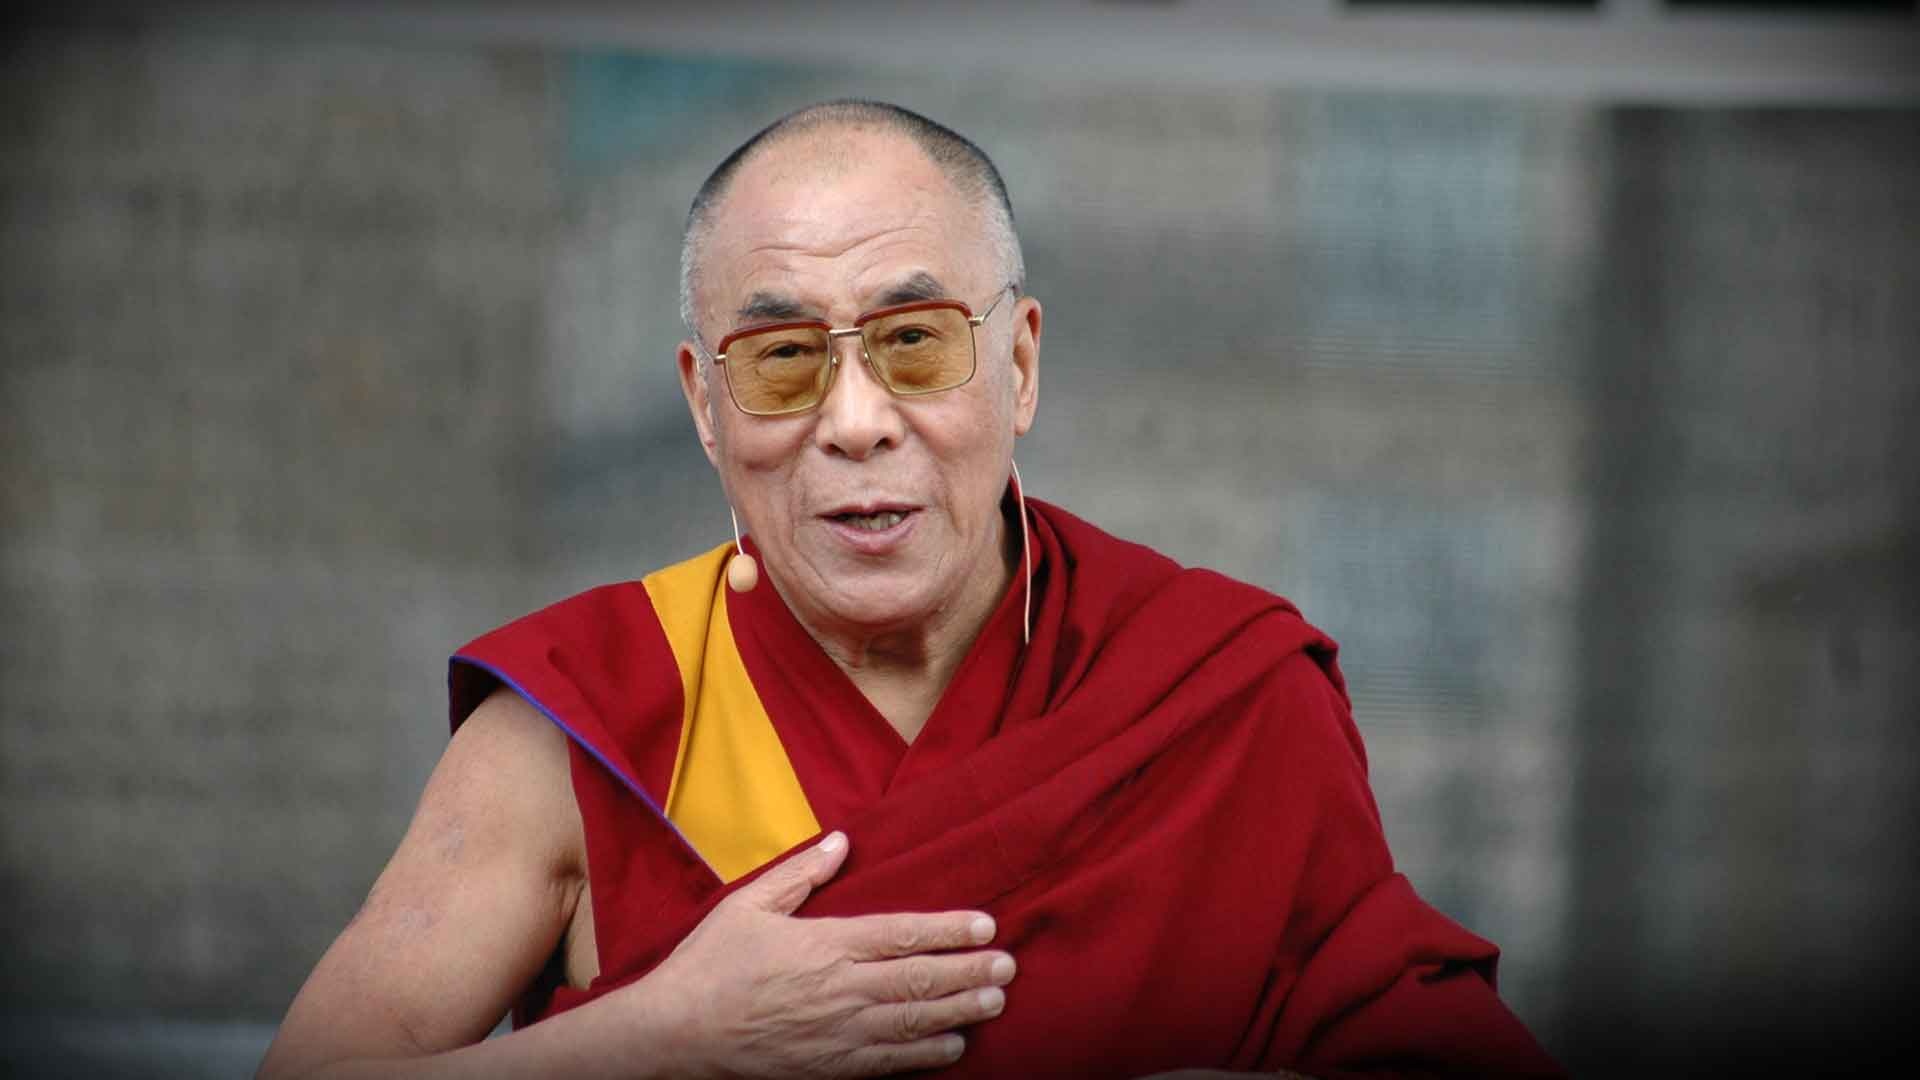 Dalai Lama: Set up a government-in-exile in Dharmsala, India. 1920x1080 Full HD Wallpaper.